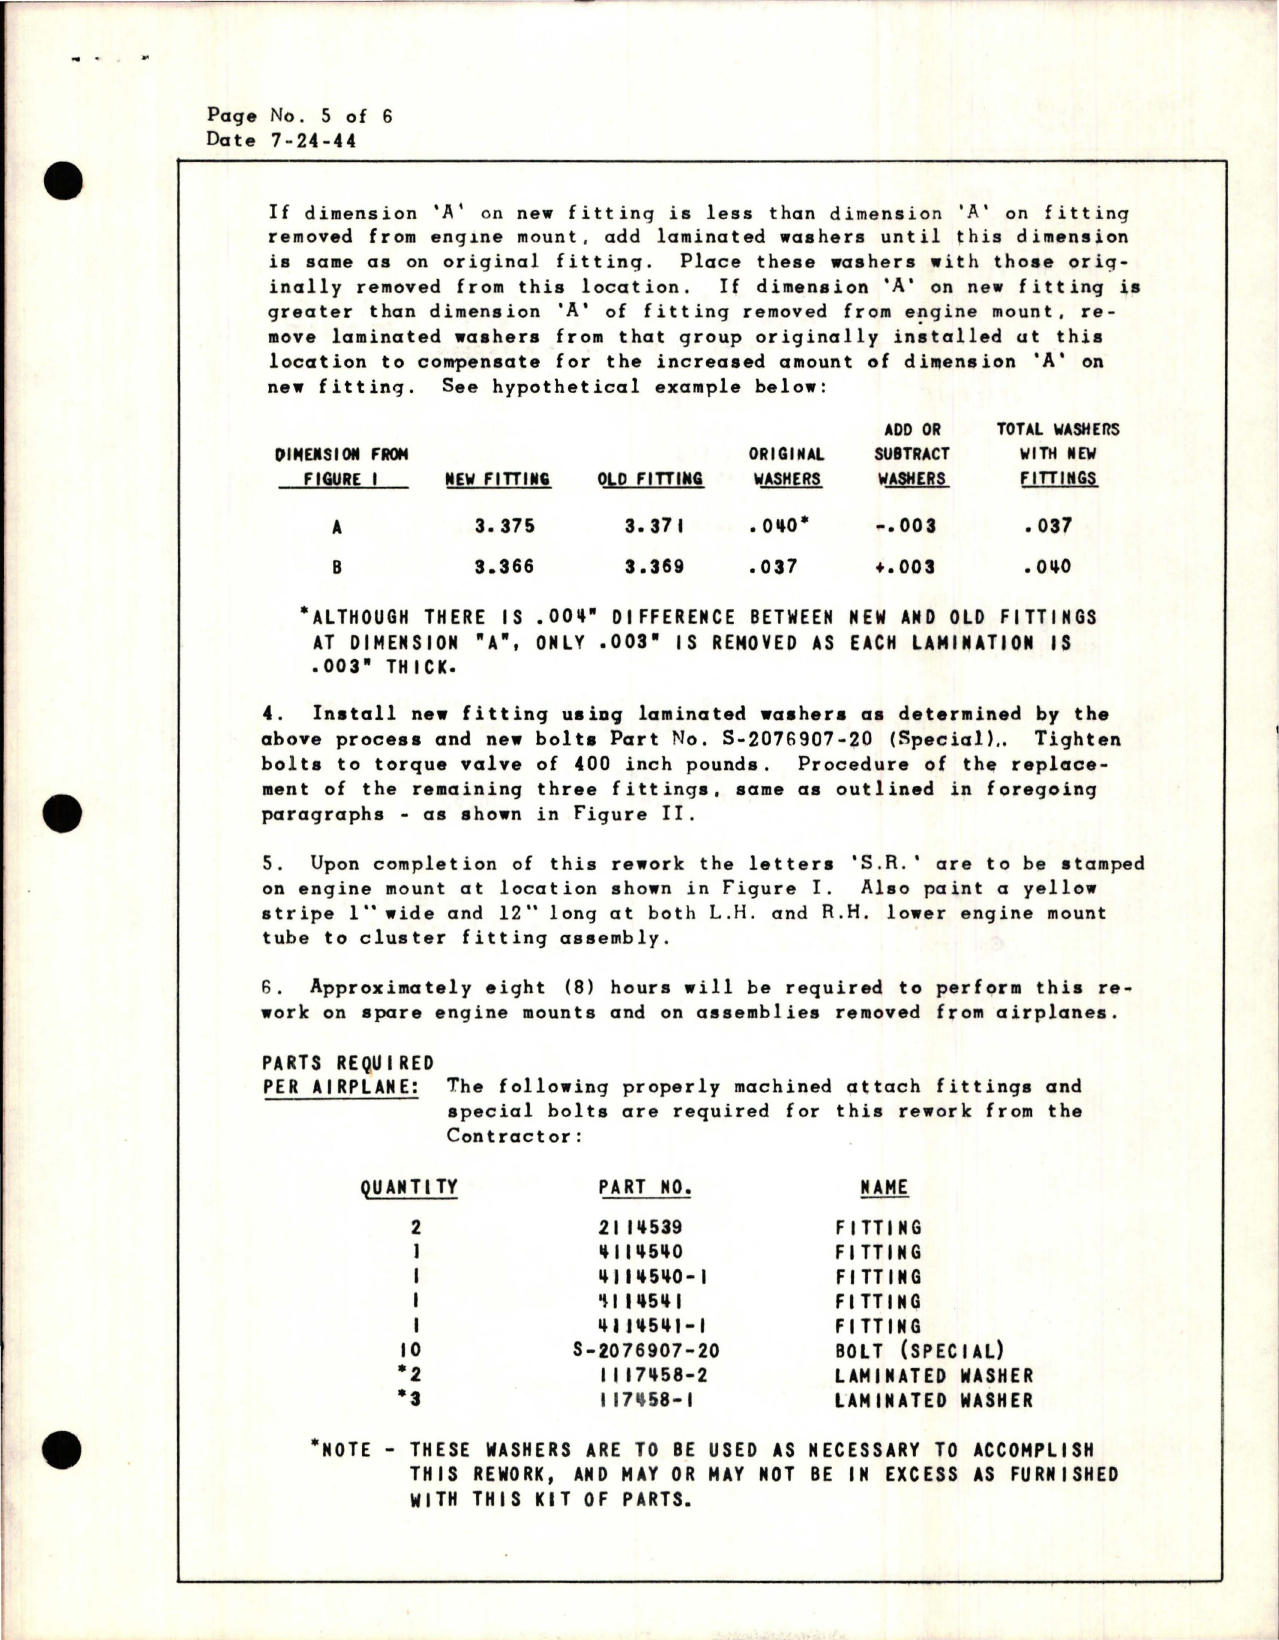 Sample page 5 from AirCorps Library document: Replacement of Cluster Fitting Assemblies - Part 4114540, 4114540-1, 4114541, 4114541-1, 2114539 - for C-47